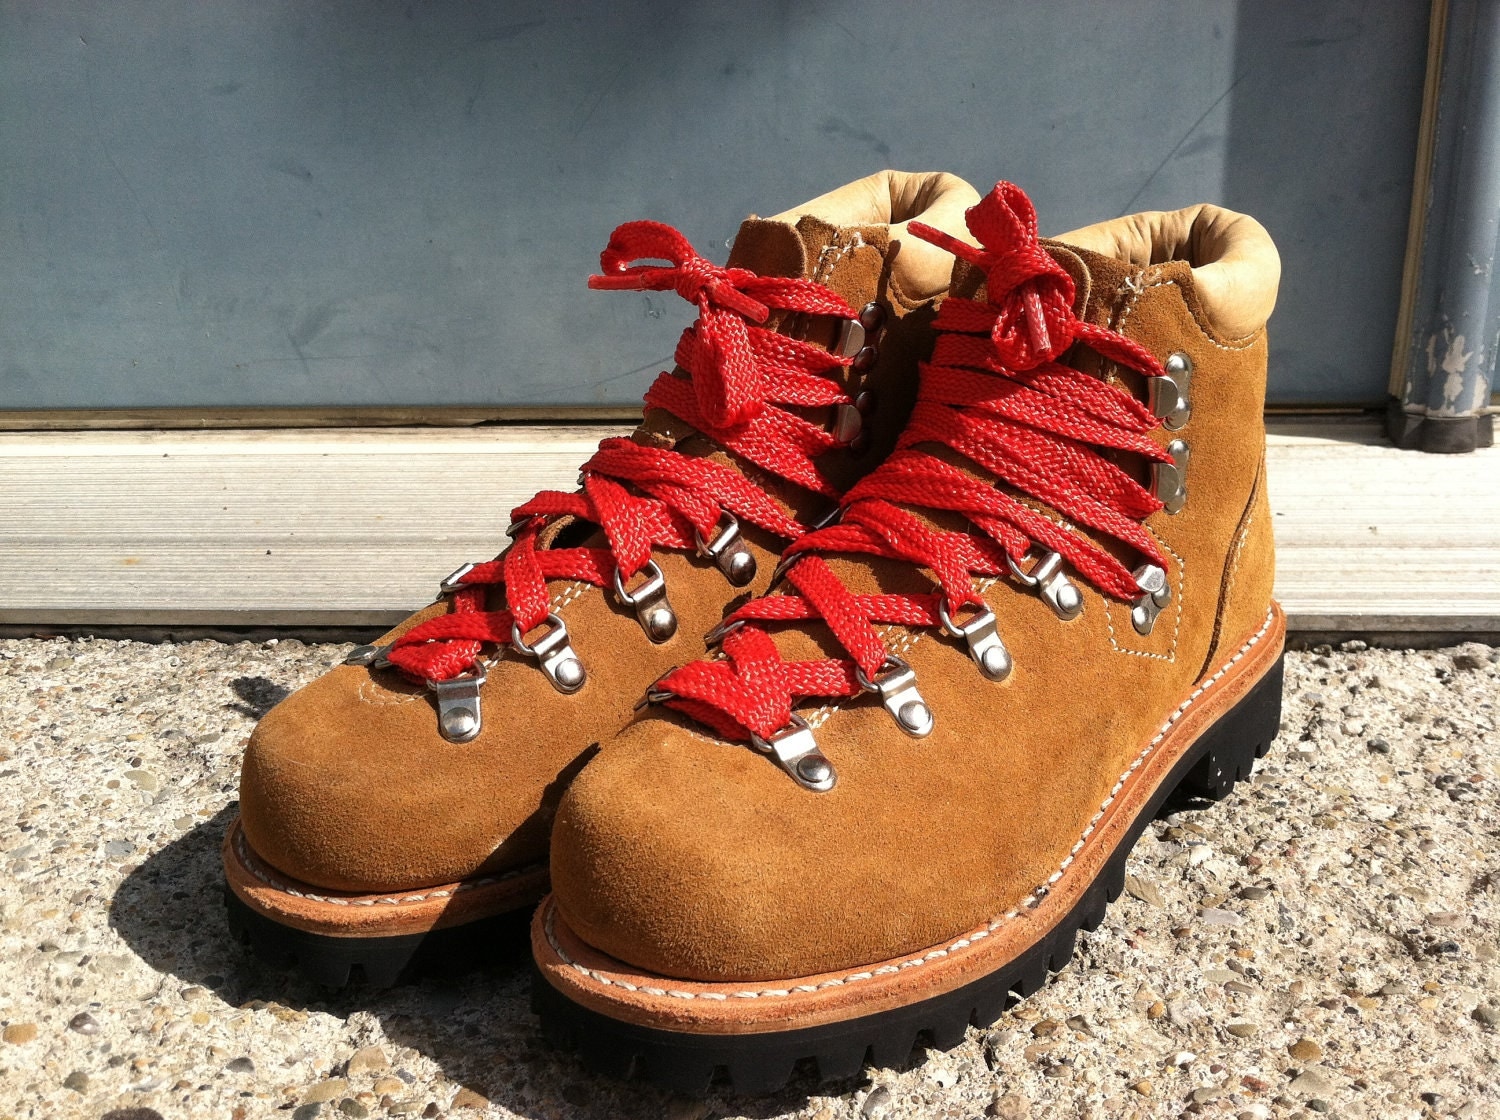 Original 70s Suede Red Lace Hiking Boots sz 7 by NeverBuyNew